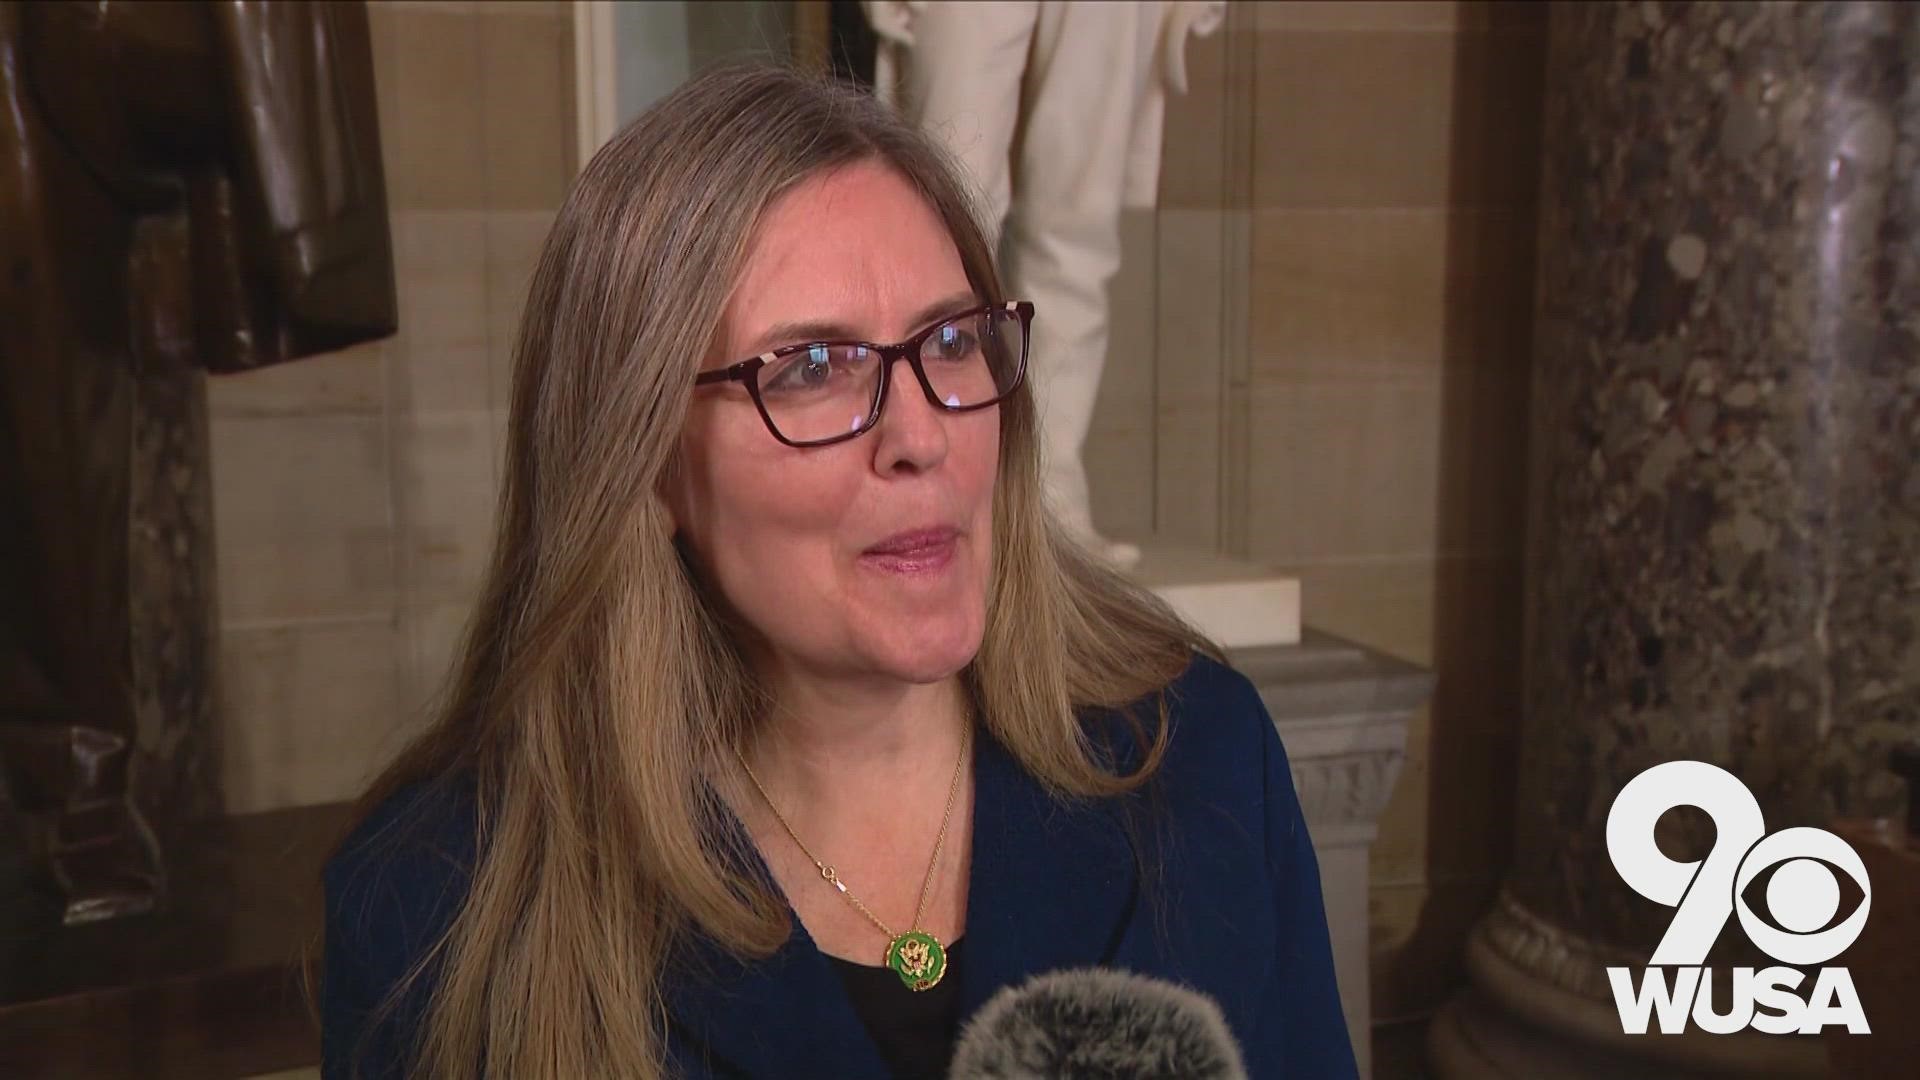 Rep. Jennifer Wexton (D-MD) says the parties can come together over cancer research and veterans after the State of the Union address.